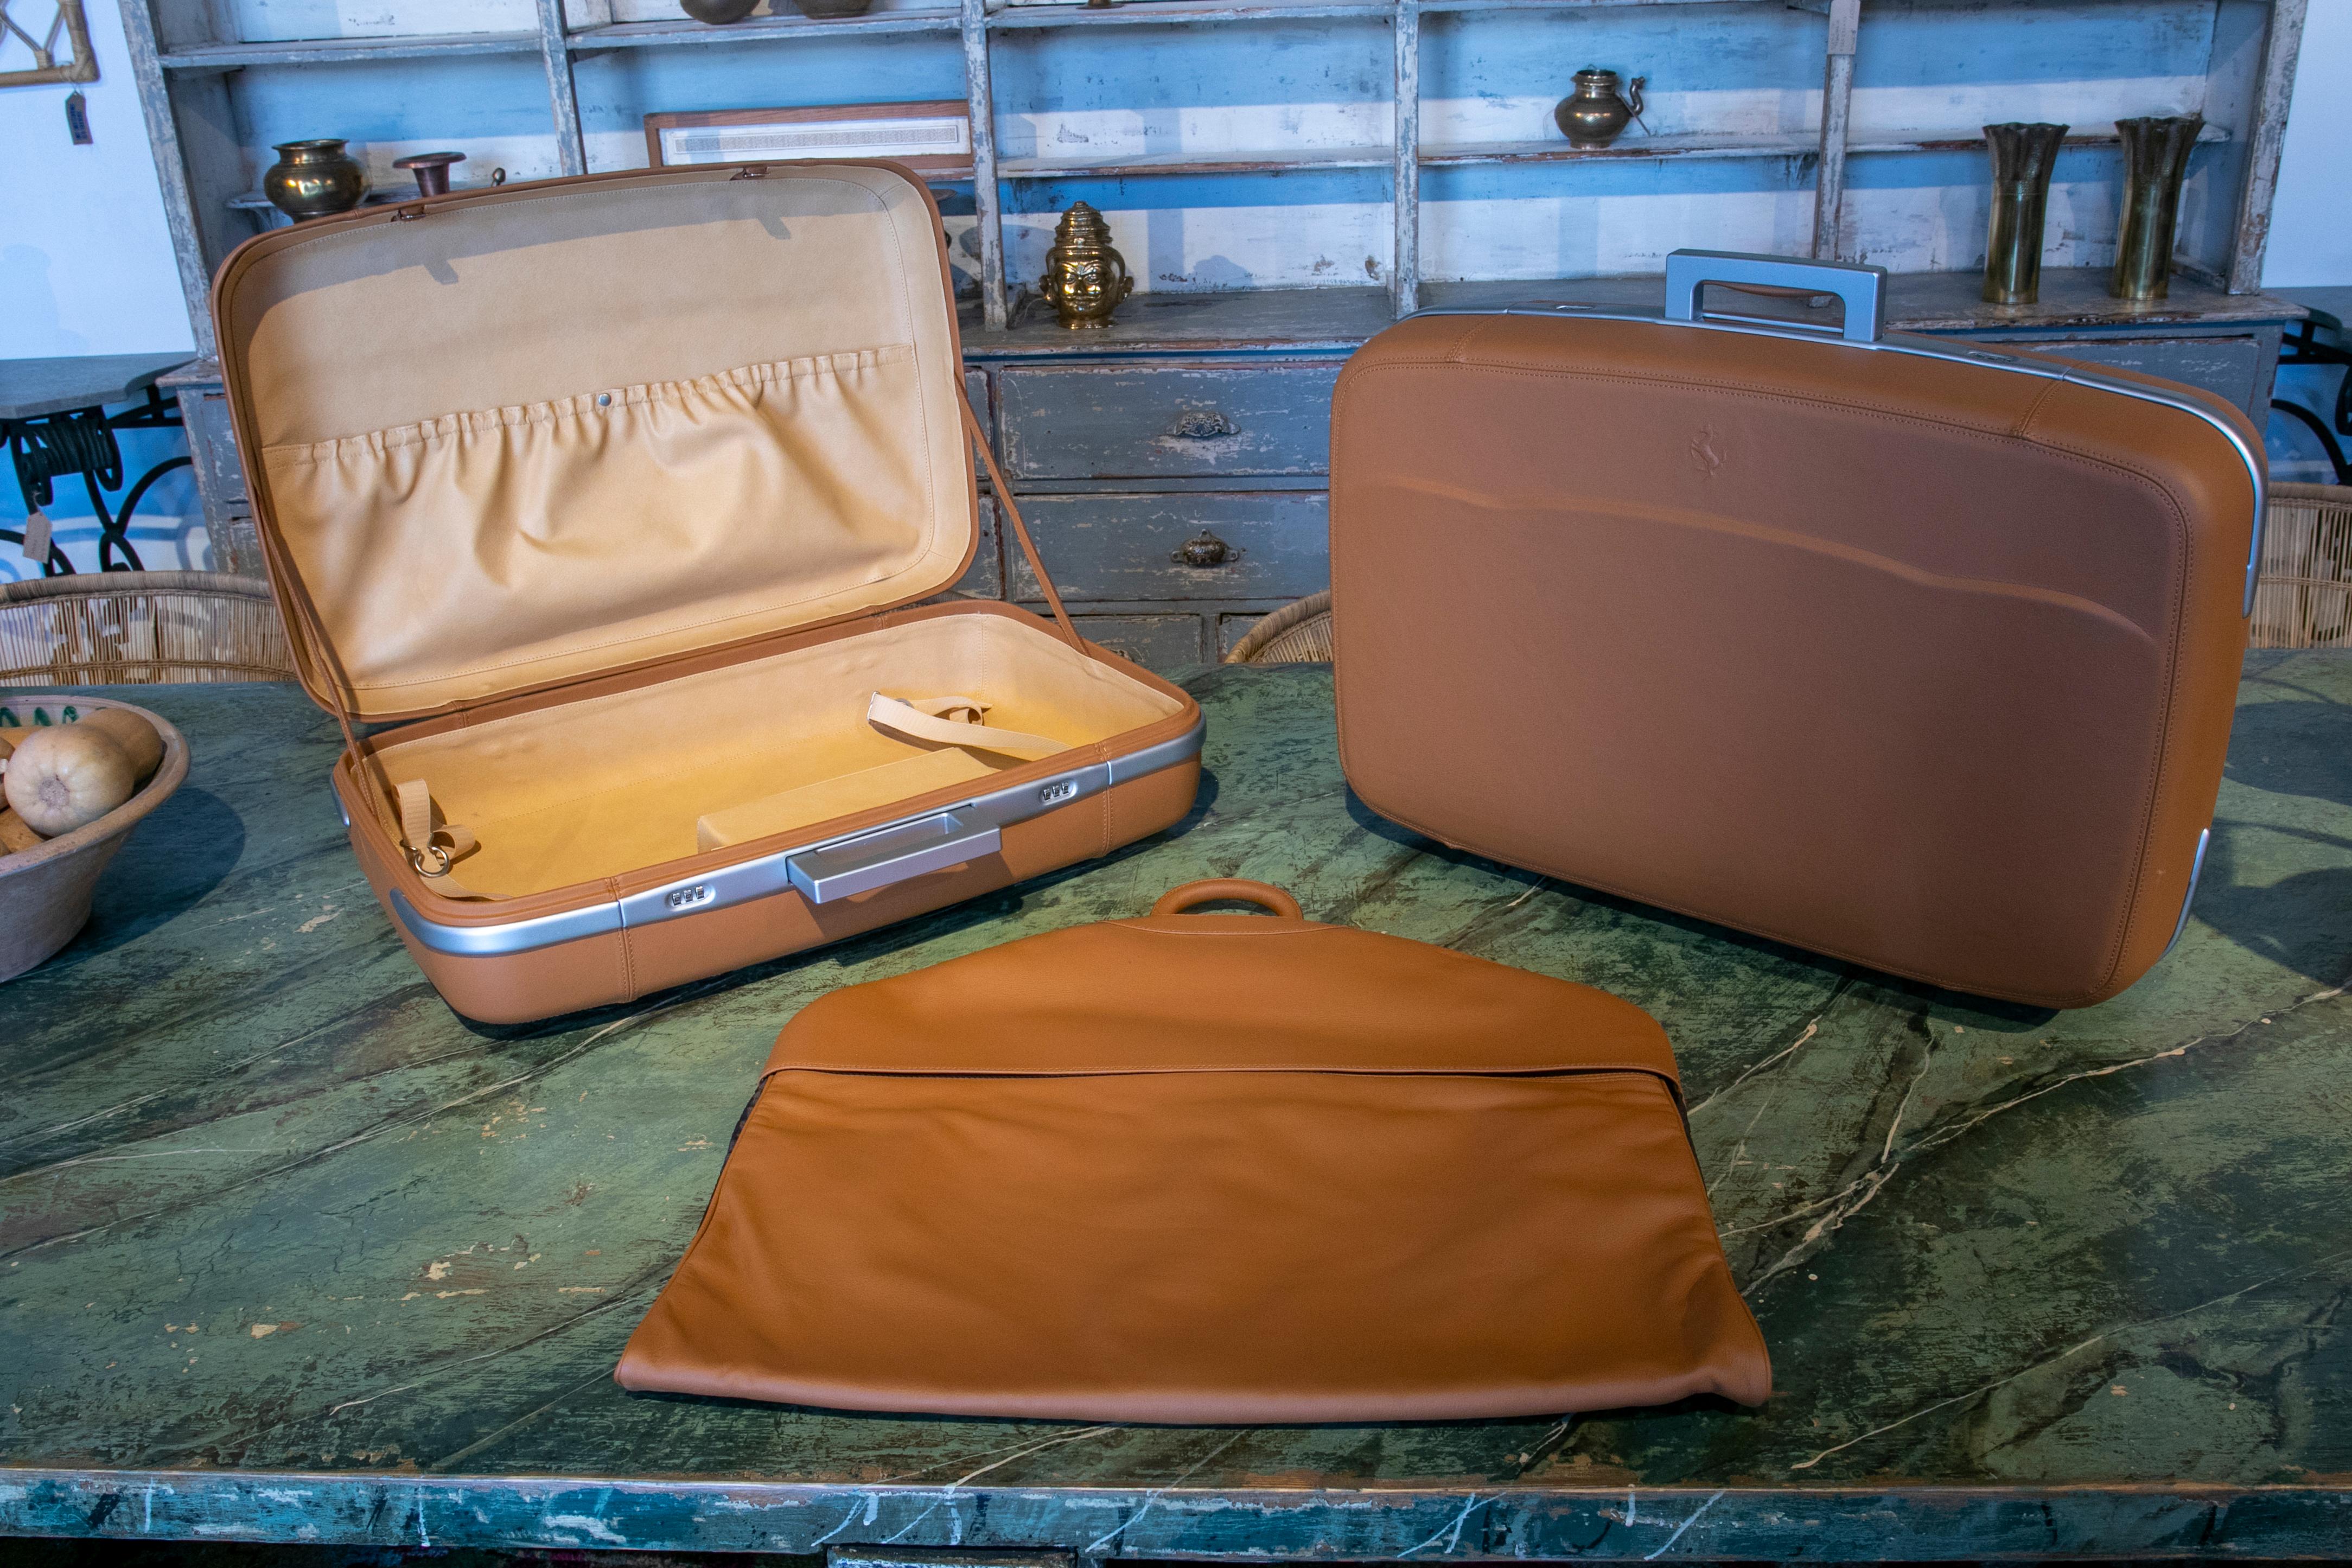 Ferrari suitcase set manufactured by Schedoni in tan leather and aluminium.
Brand new with original cases.